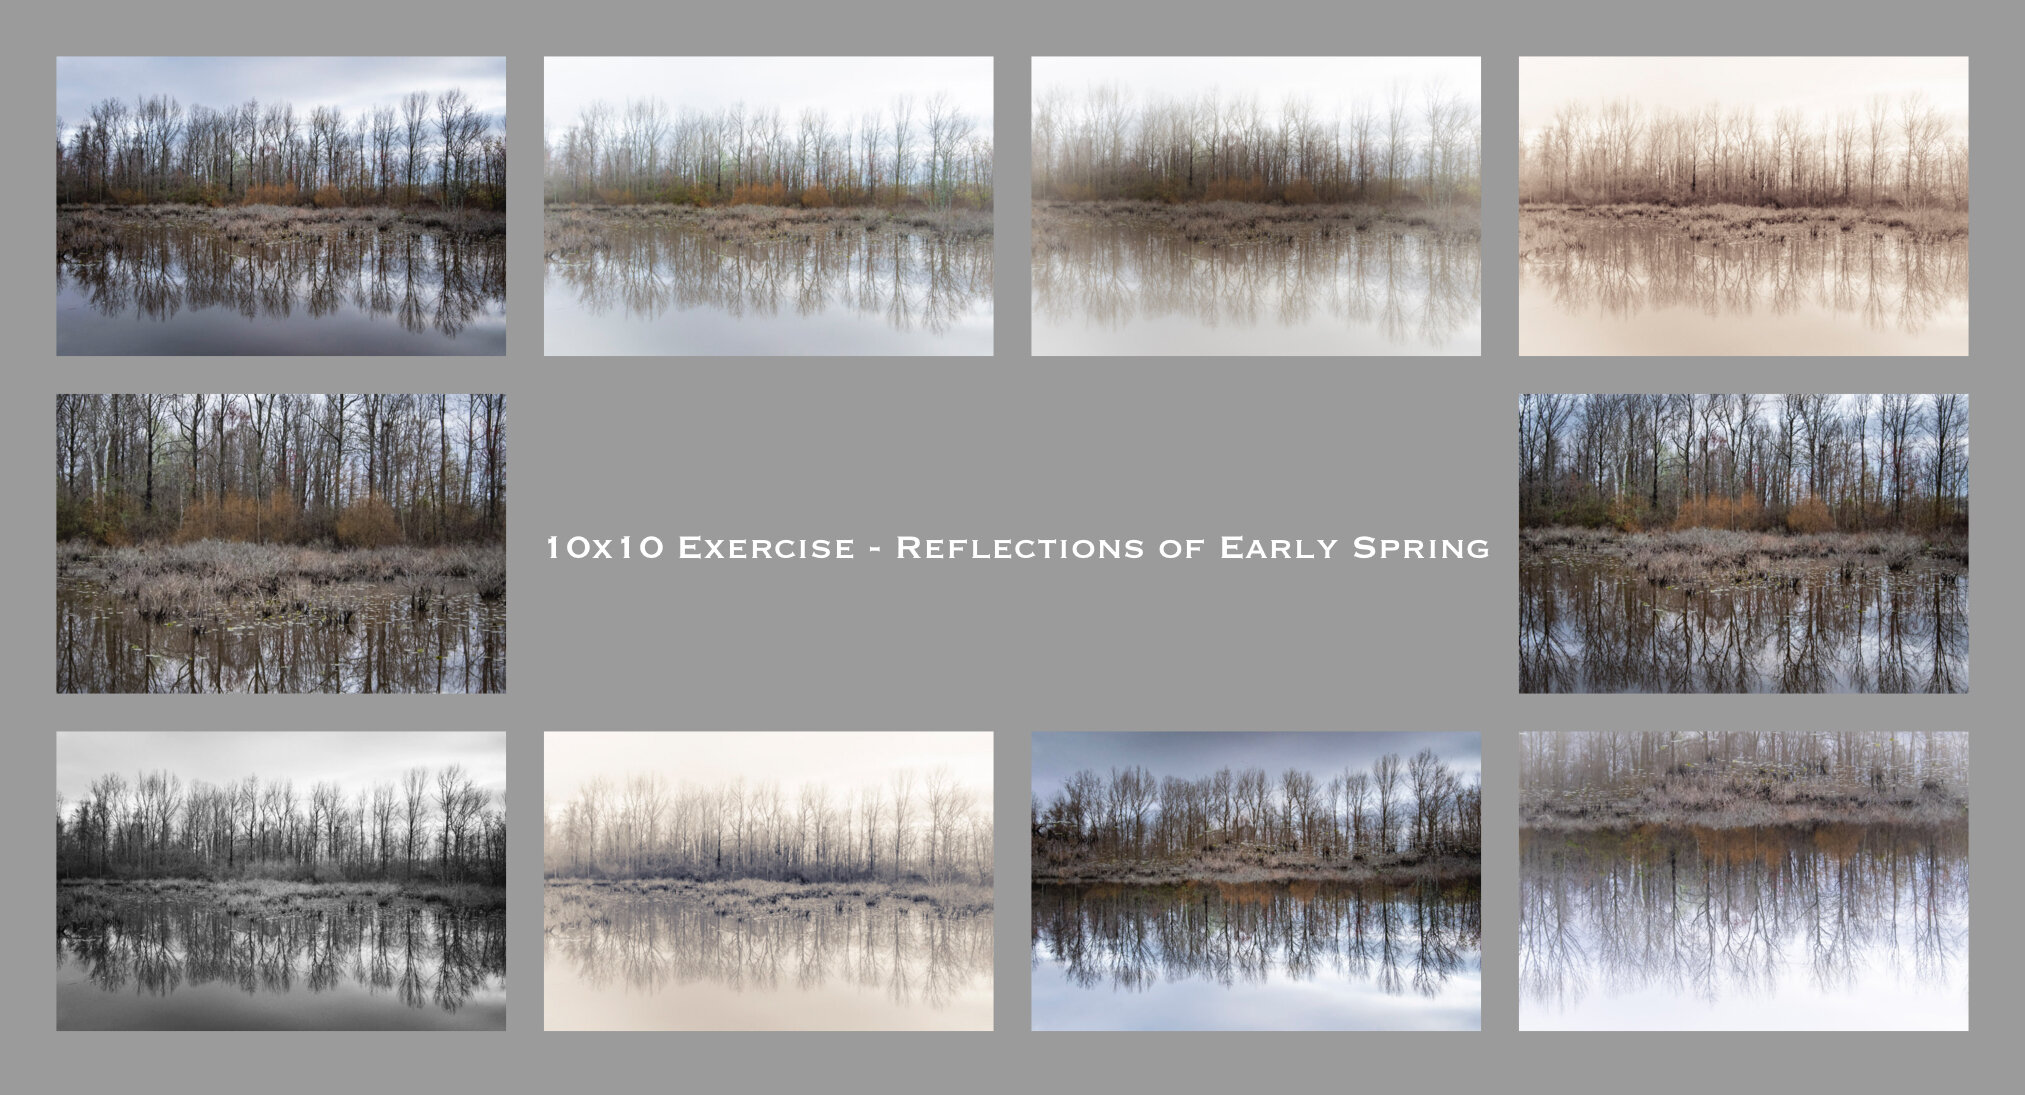 10x10 Exercise - Reflections of Early Spring